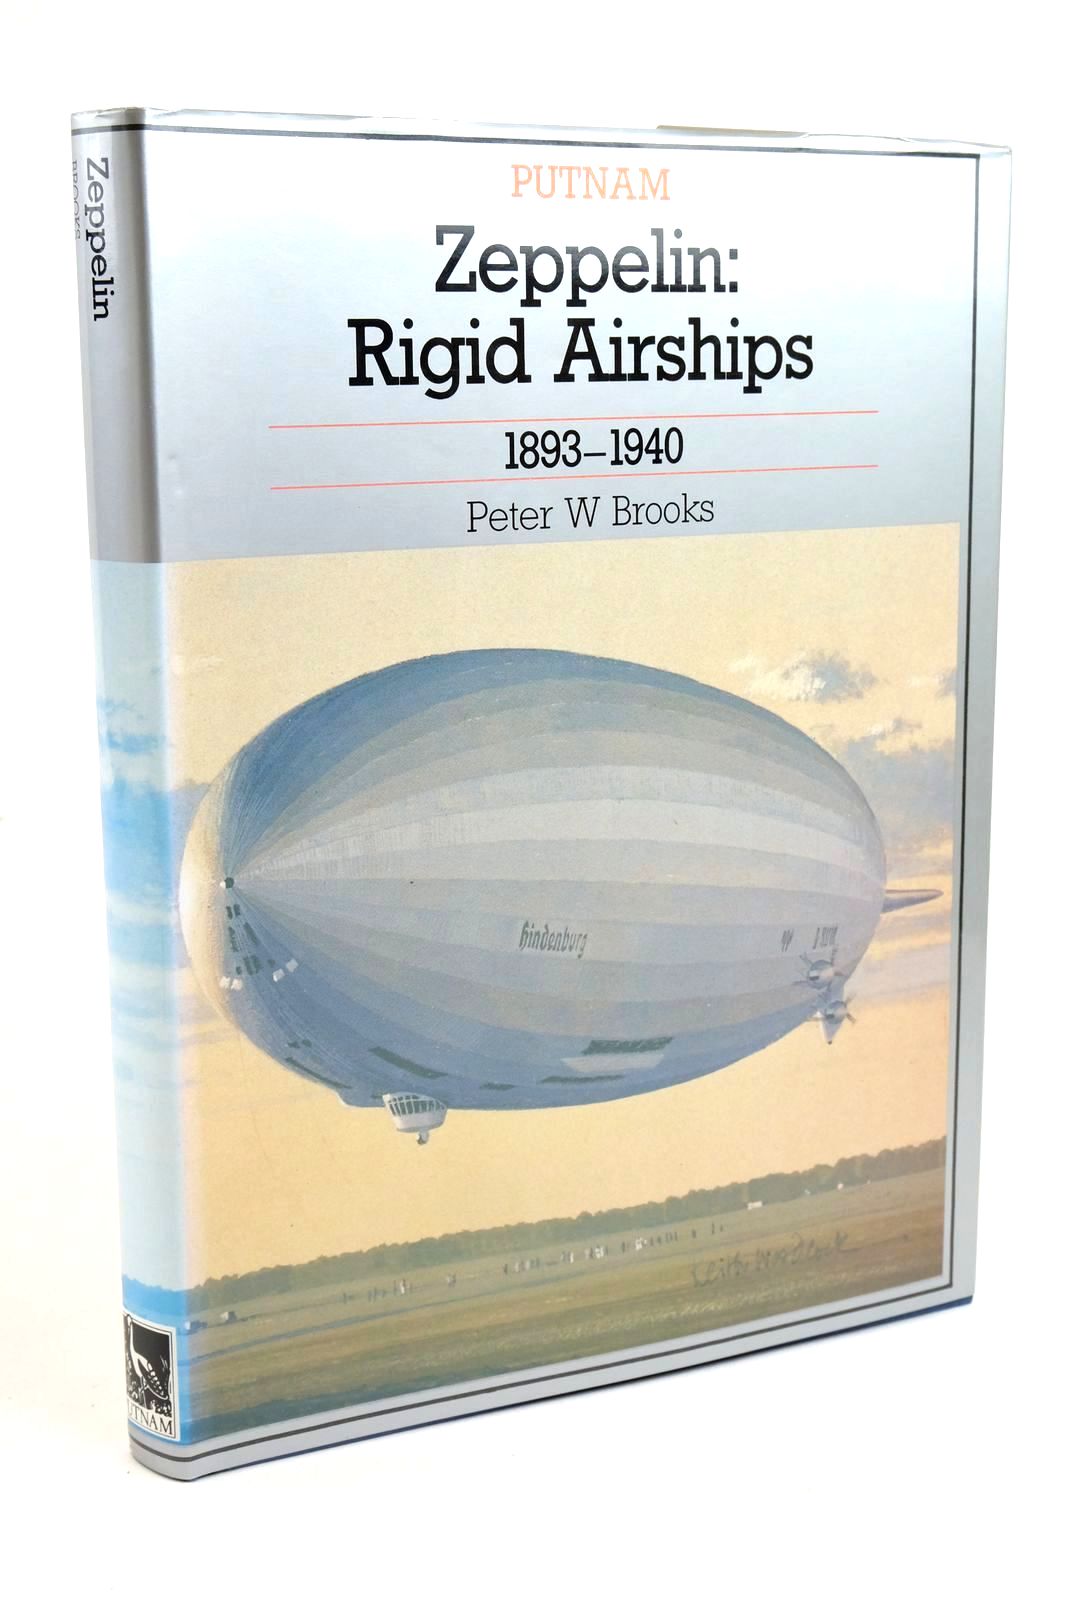 Photo of ZEPPELIN: RIGID AIRSHIPS 1893-1940 written by Brooks, Peter W. published by Putnam (STOCK CODE: 1322050)  for sale by Stella & Rose's Books